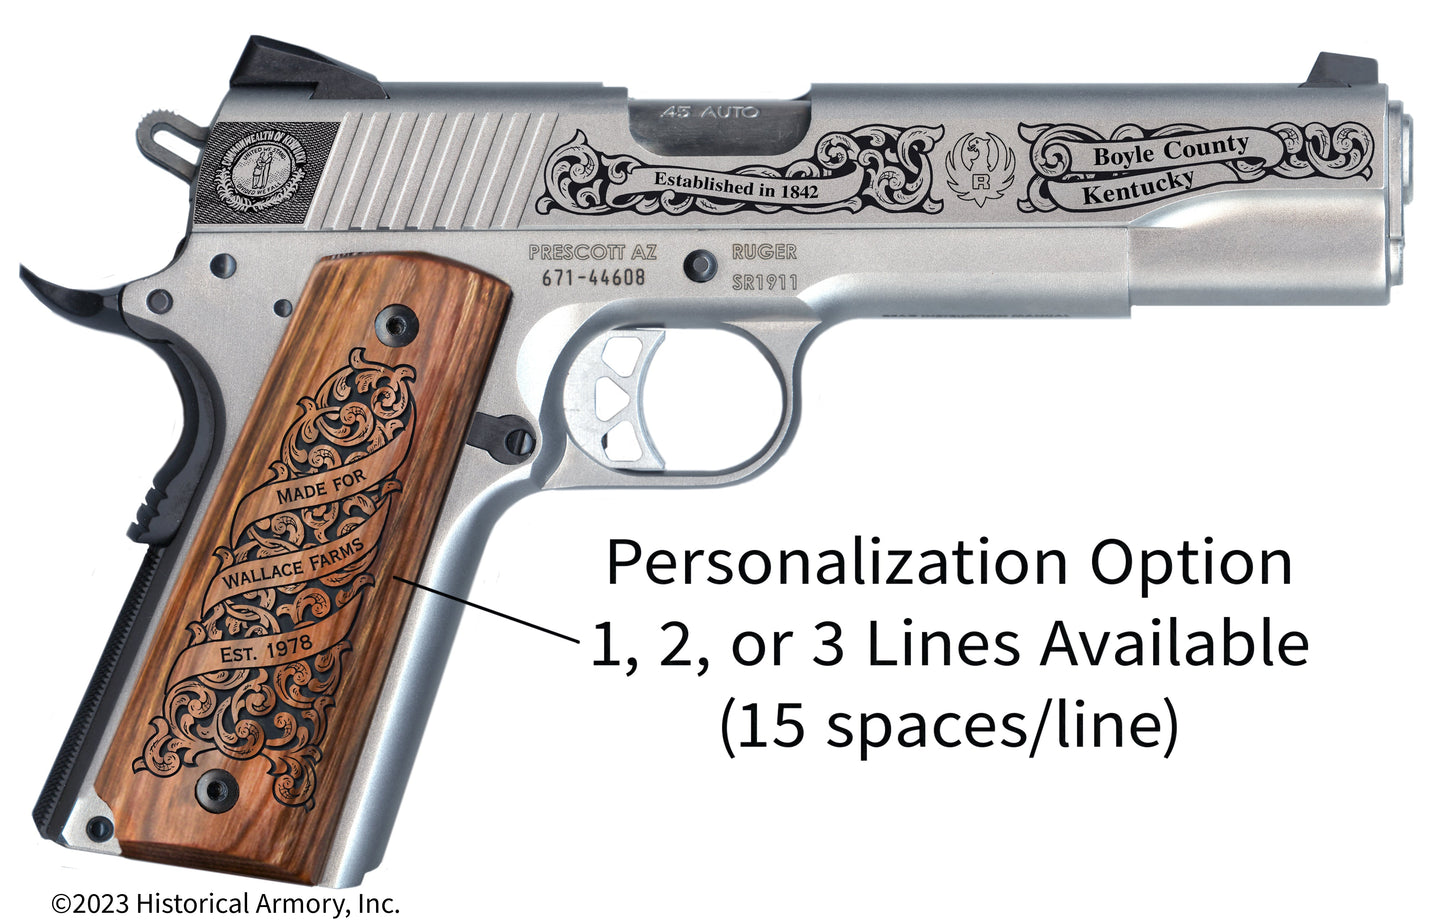 Boyle County Kentucky Personalized Engraved .45 Auto Ruger 1911